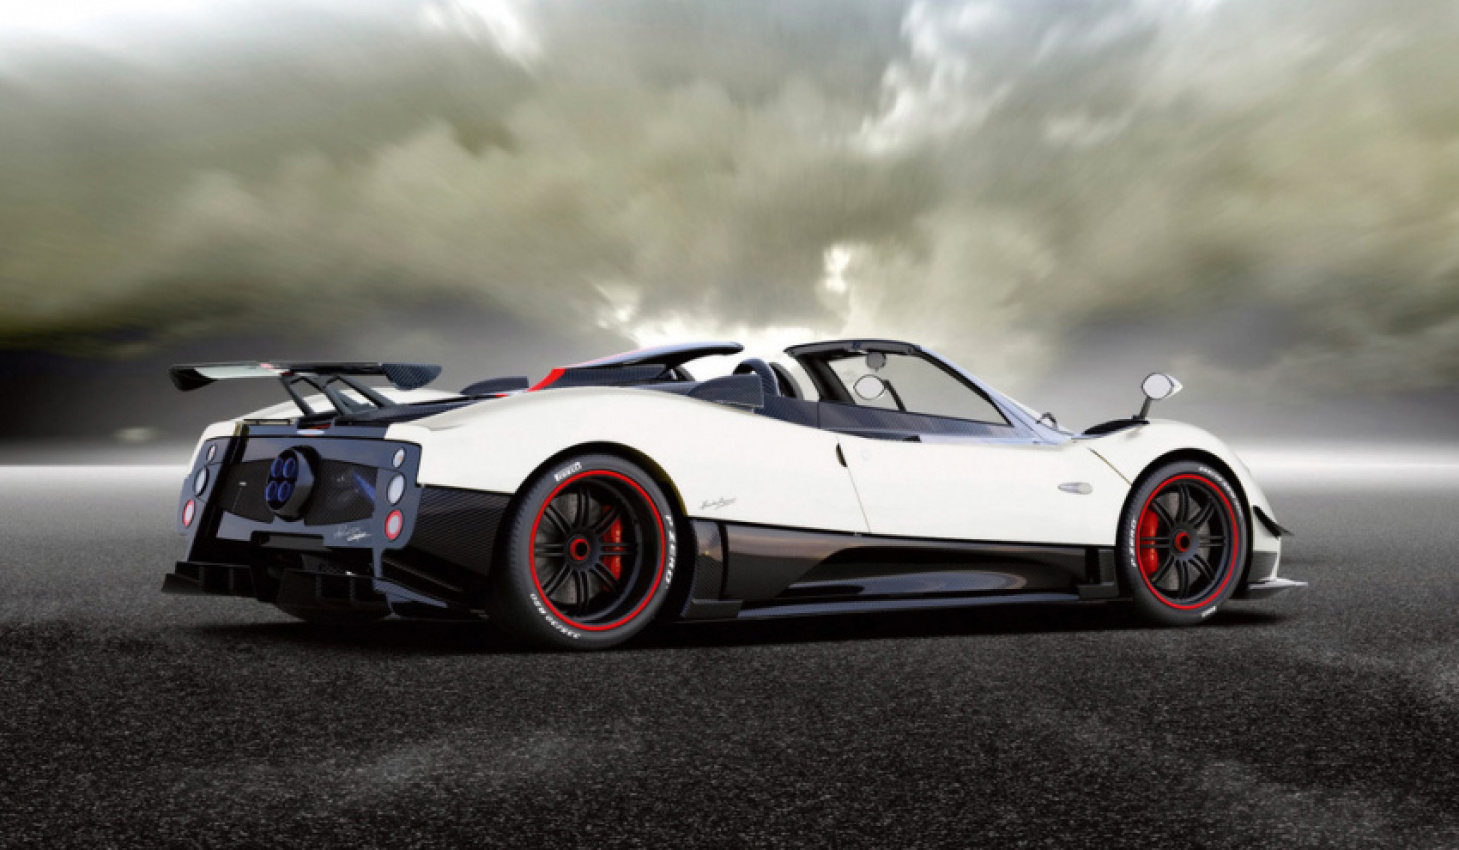 autos, cars, pagani, review, 0-60 3-4sec, 2000s cars, 600-700hp, best of the best, icon, icons, pagani model in depth, pagani zonda, pagani zonda in depth, supercar, top speed 200mph+, v12, 2009 pagani zonda cinque roadster